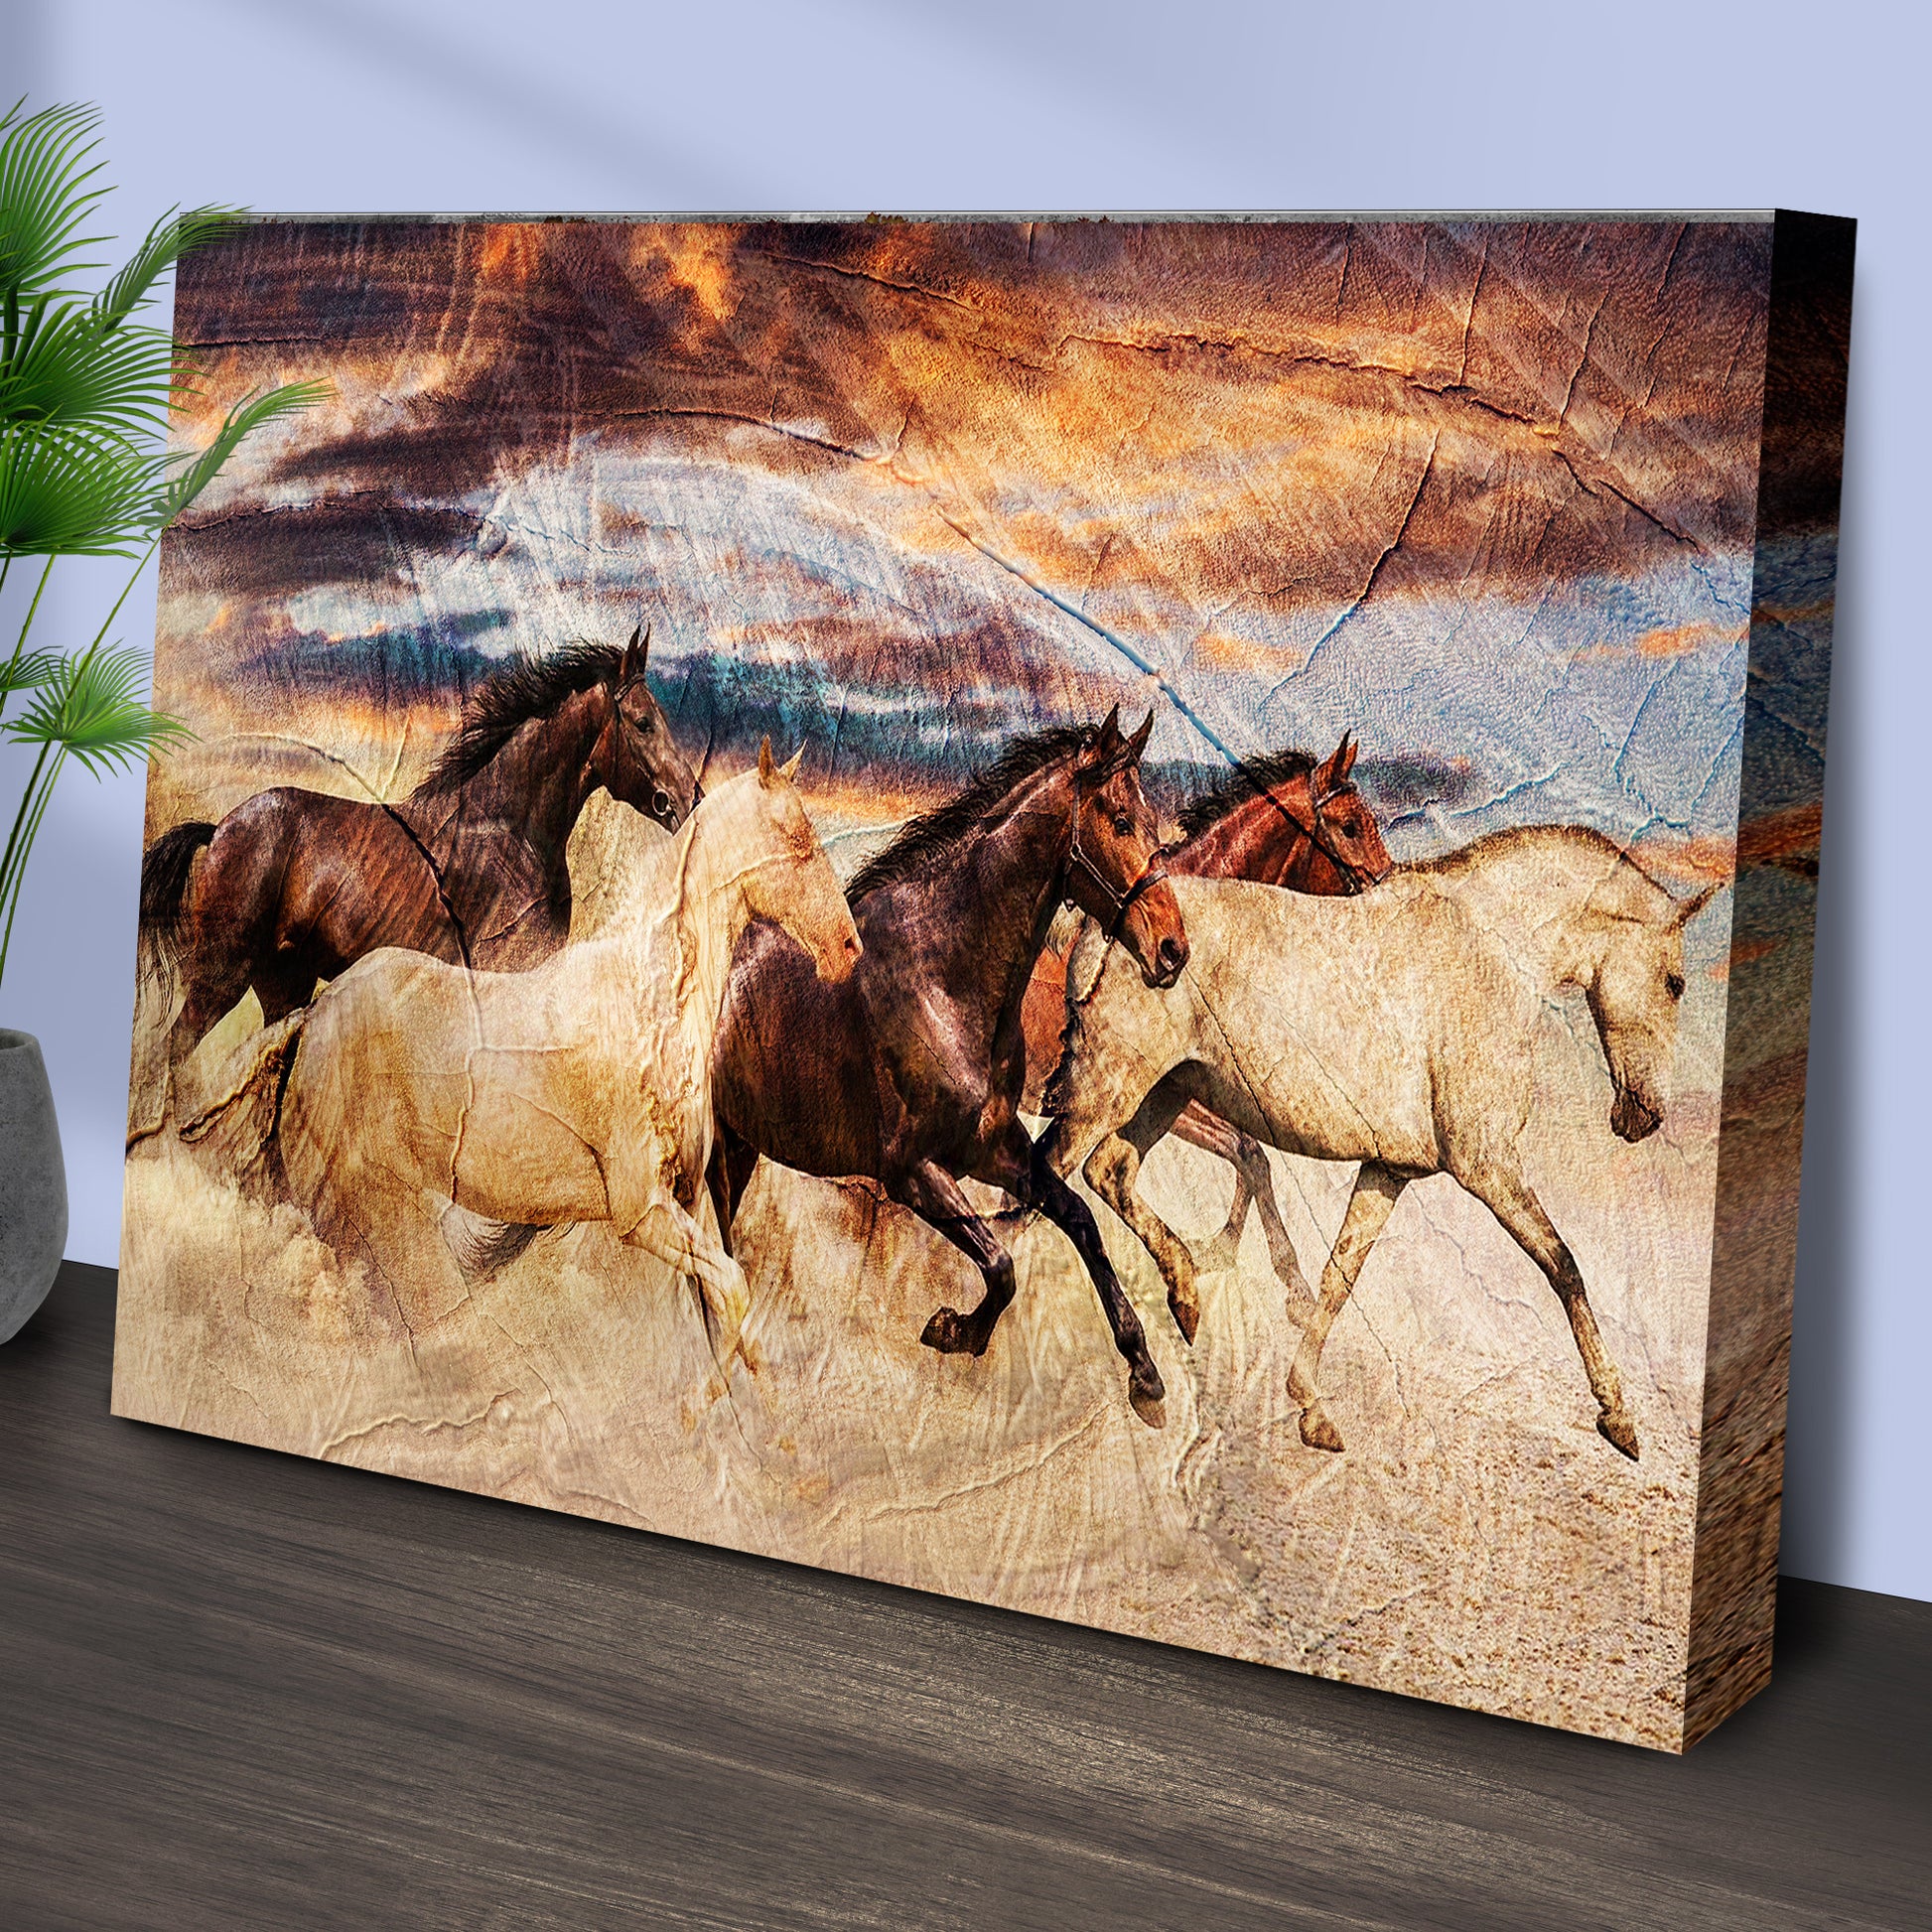 Galloping Horses Canvas Wall Art Style 1 - Image by Tailored Canvases